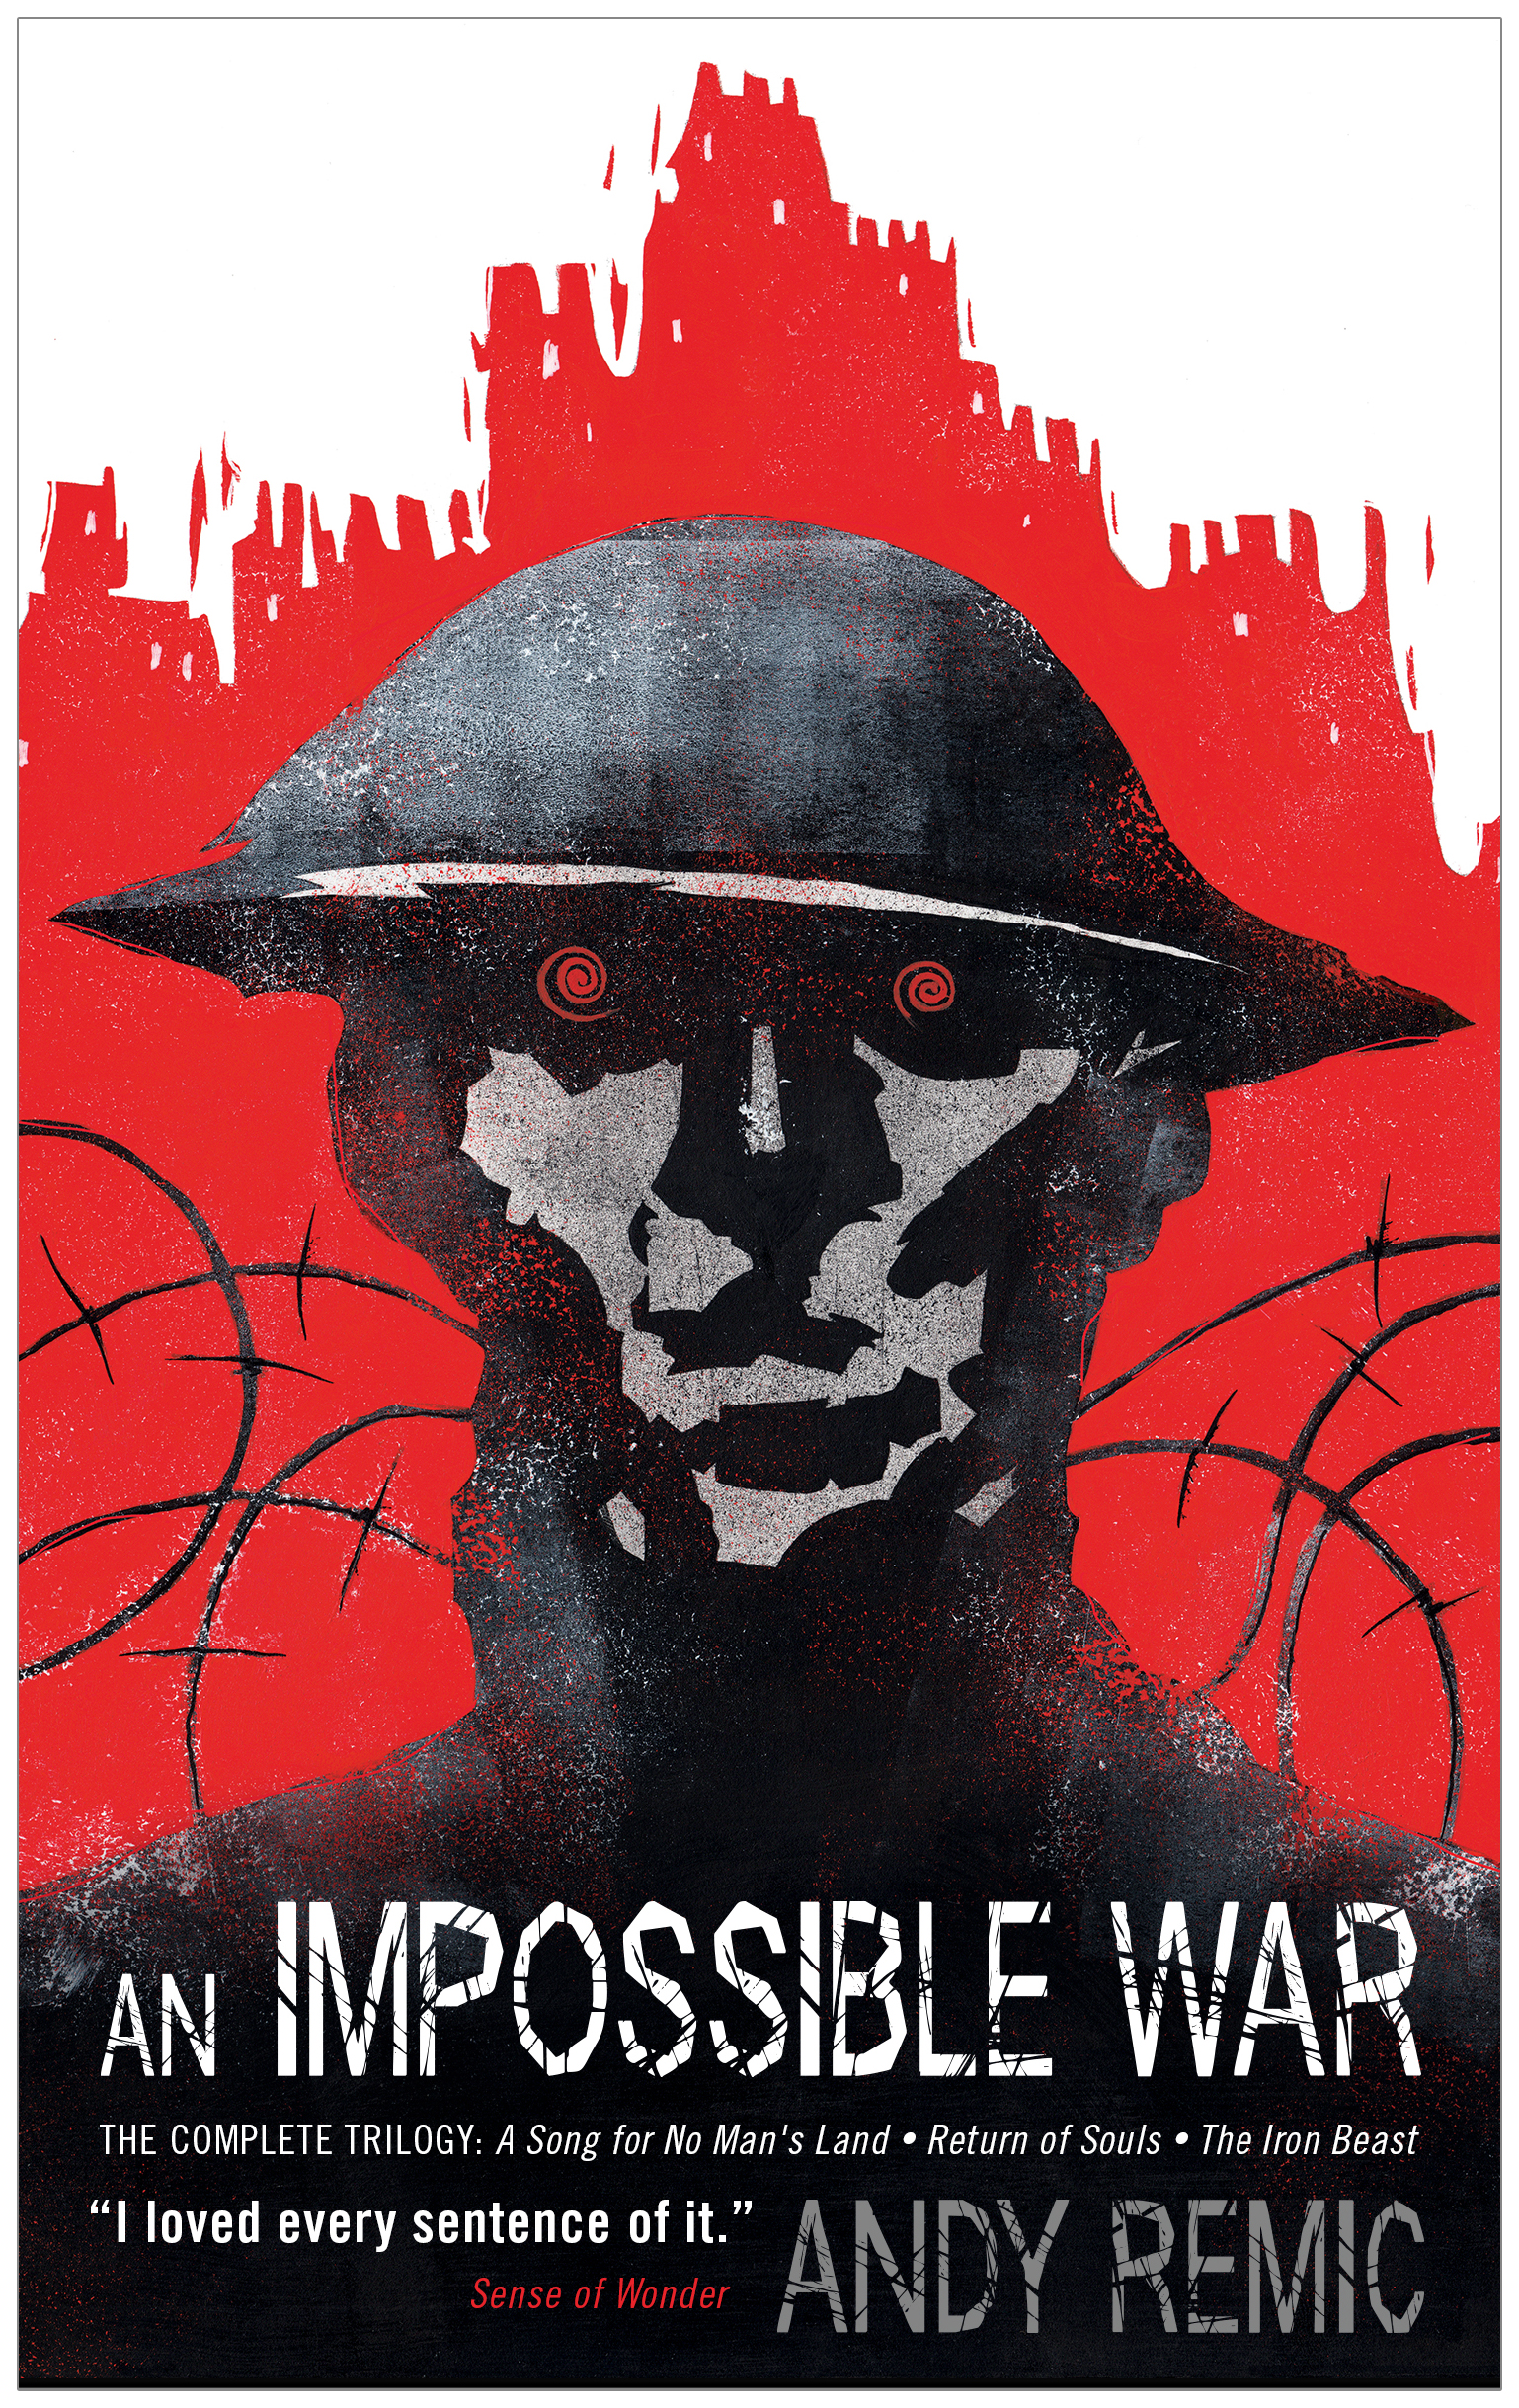 An Impossible War : A Song for No Man's Land, Return of Souls, The Iron Beast by Andy Remic